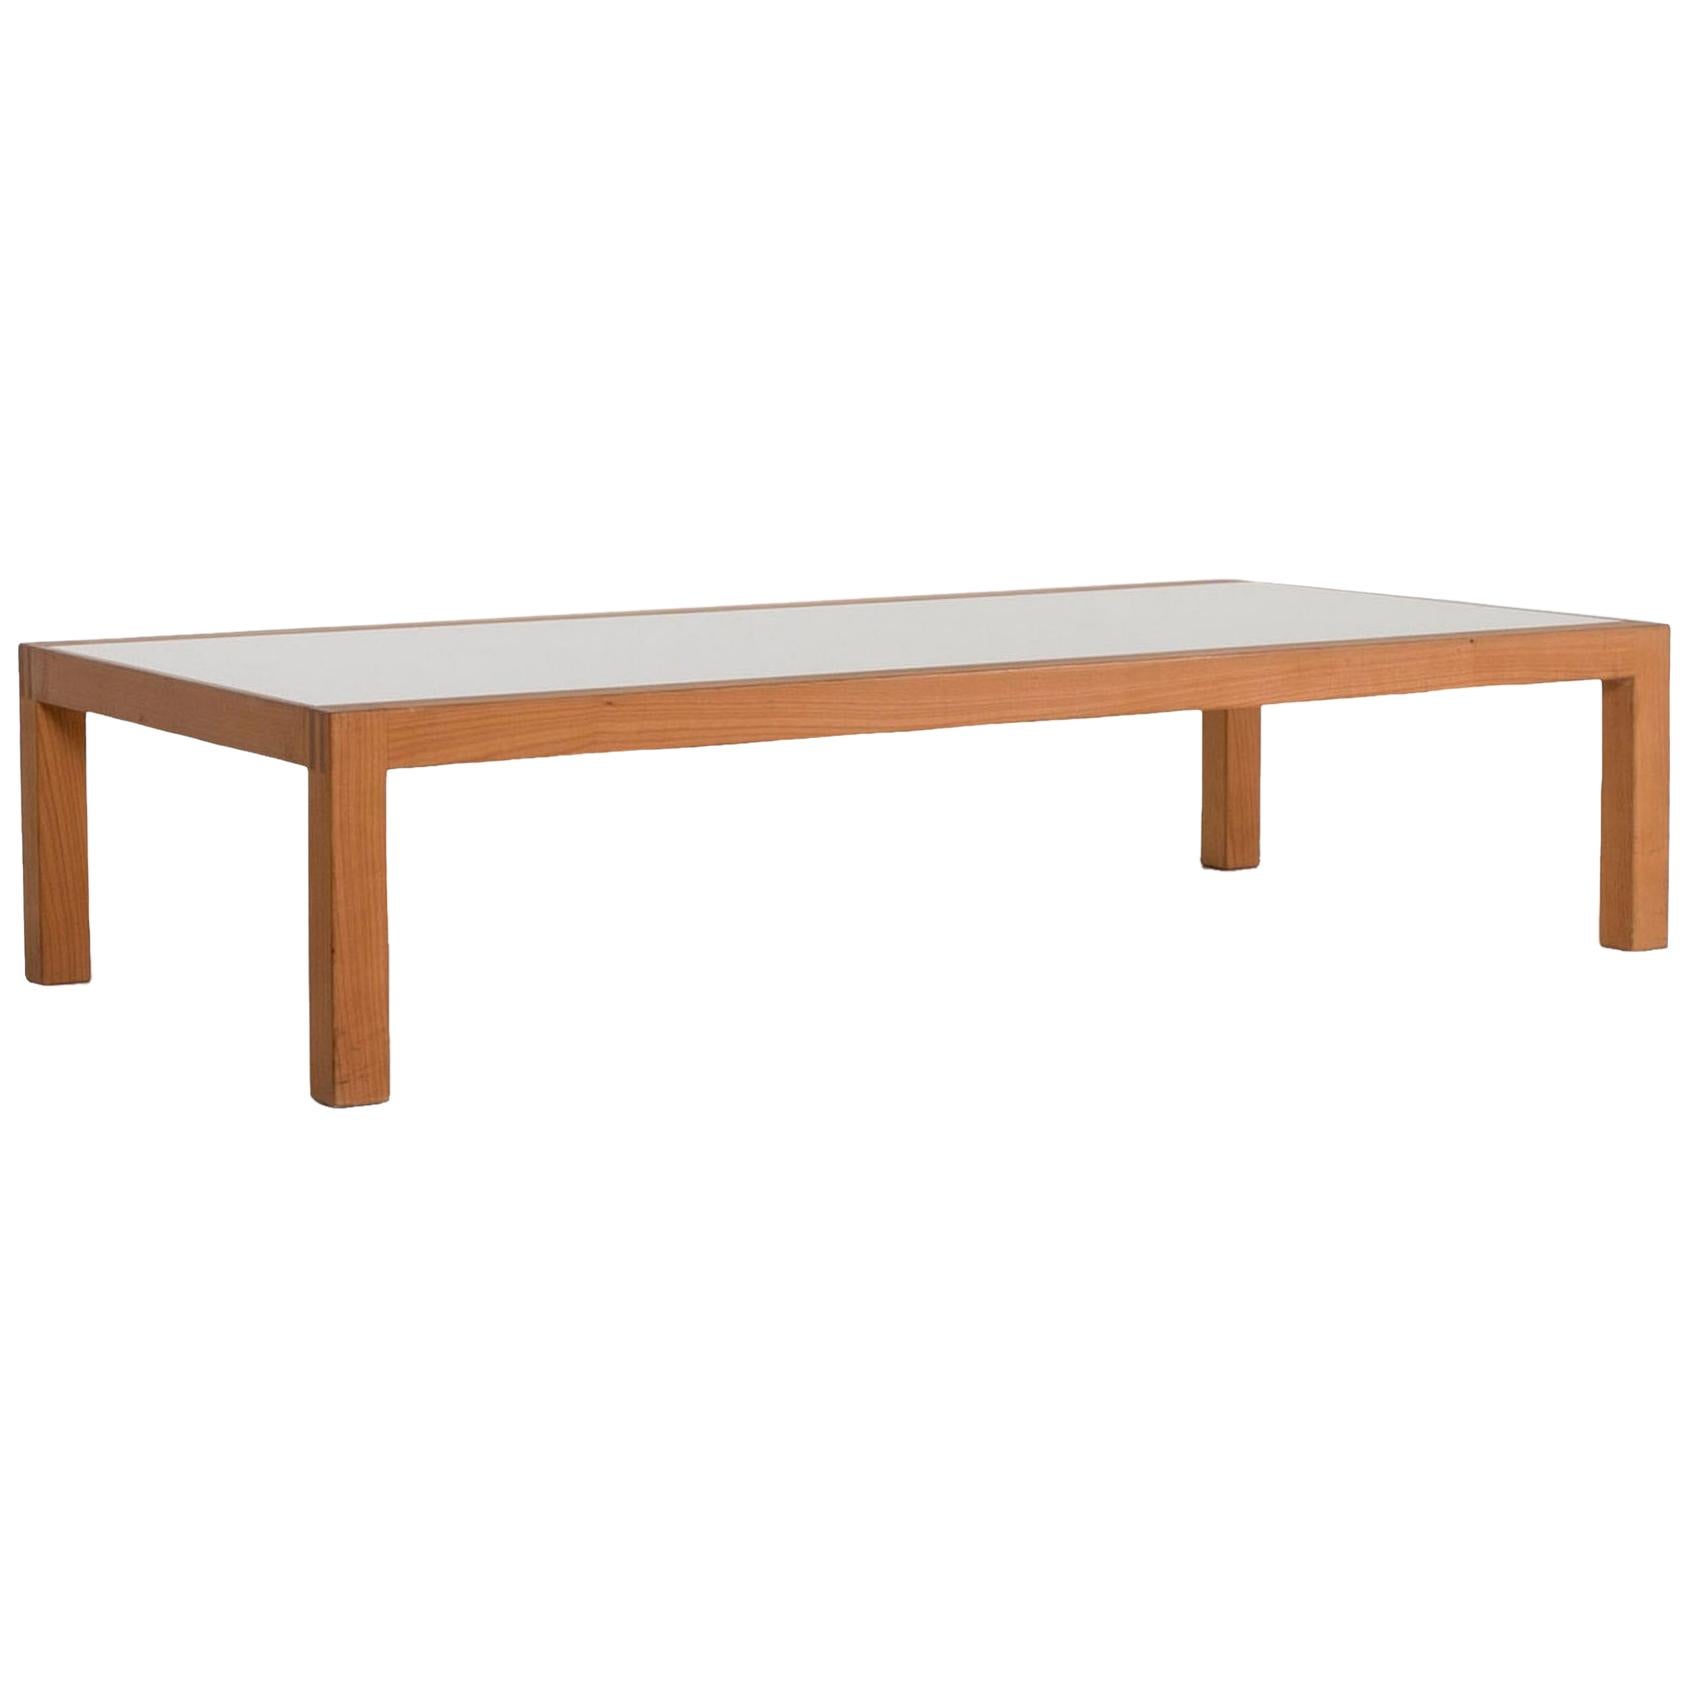 Team 7 Loft Wood Glass Coffee Table Table For Sale